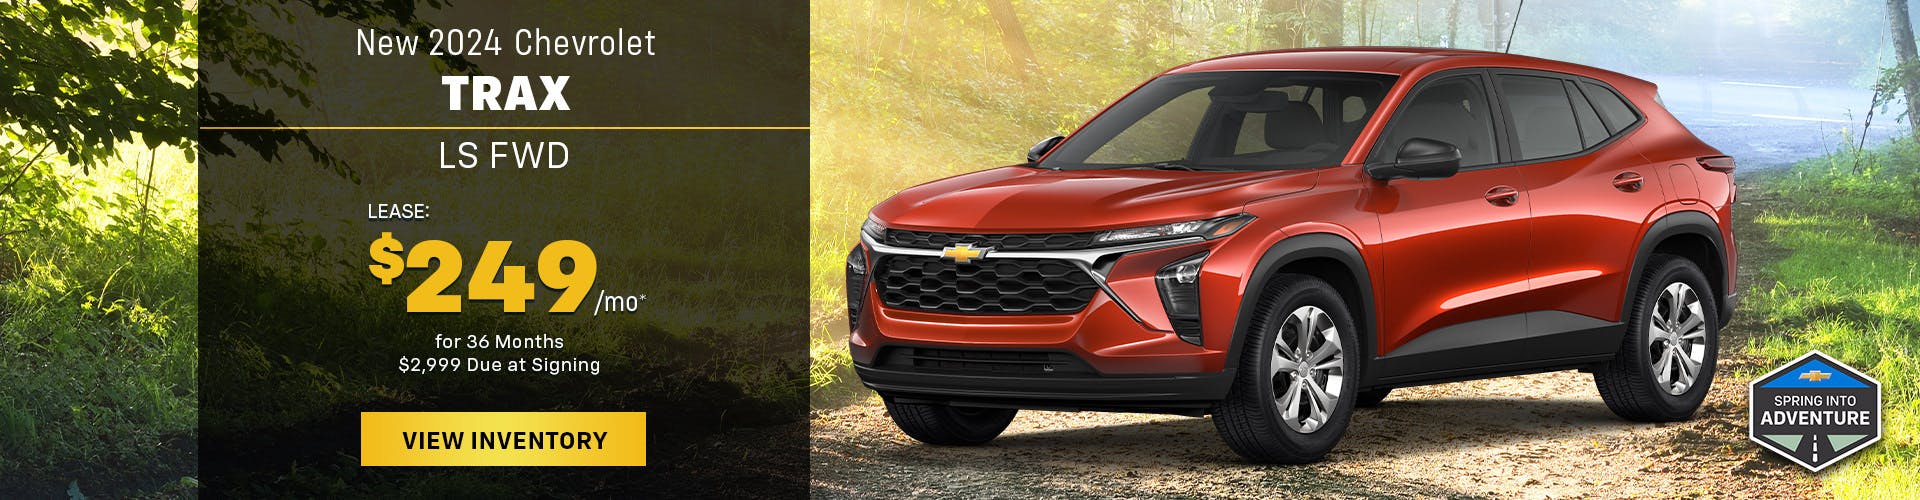 New 2024 Chevrolet Trax – Lease for $249/Month